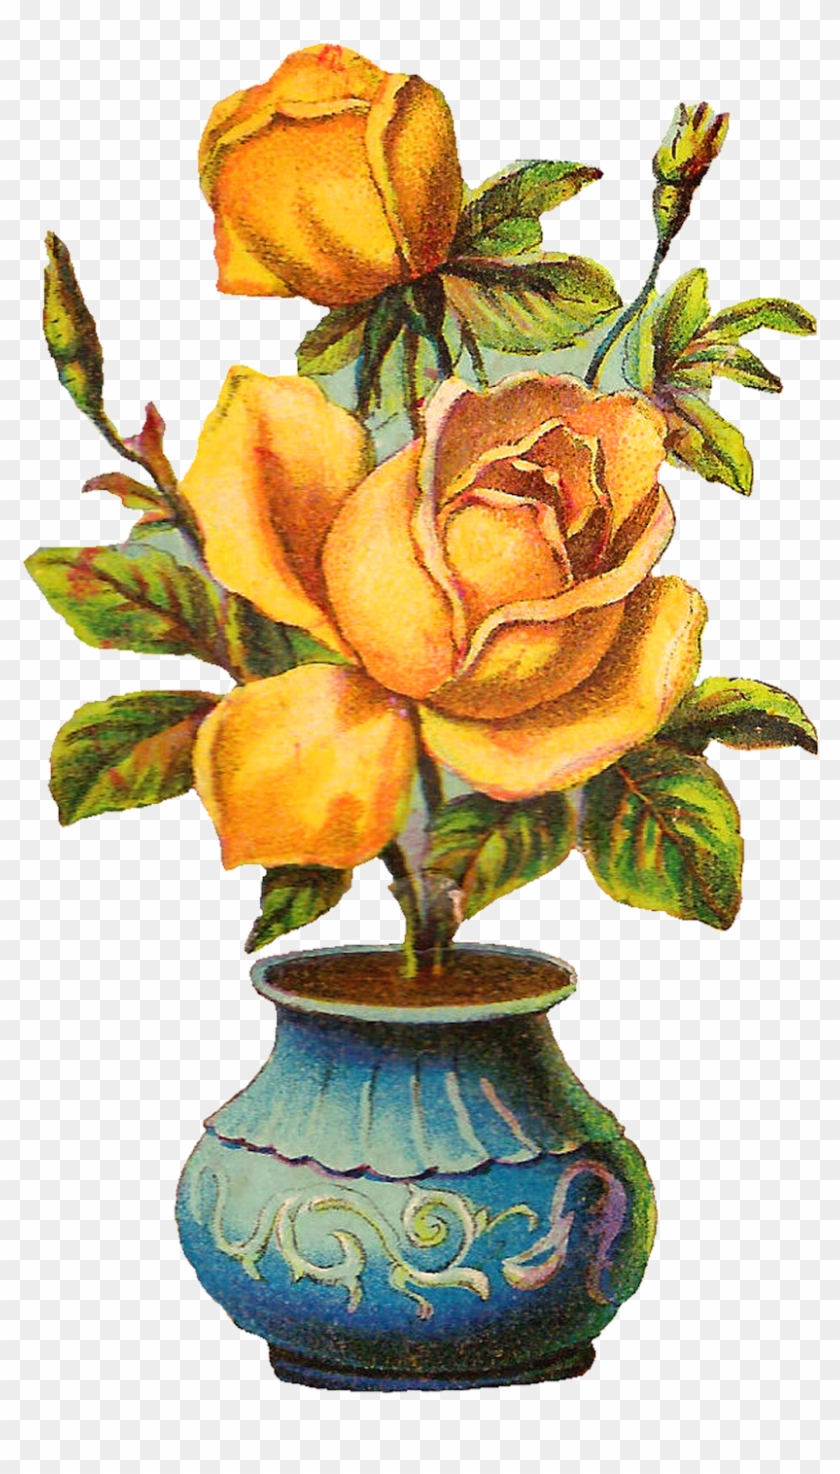 Yellow Roses Are My Favorite Flower I Created This - Rose Flower Hd Pot Clipart #118125